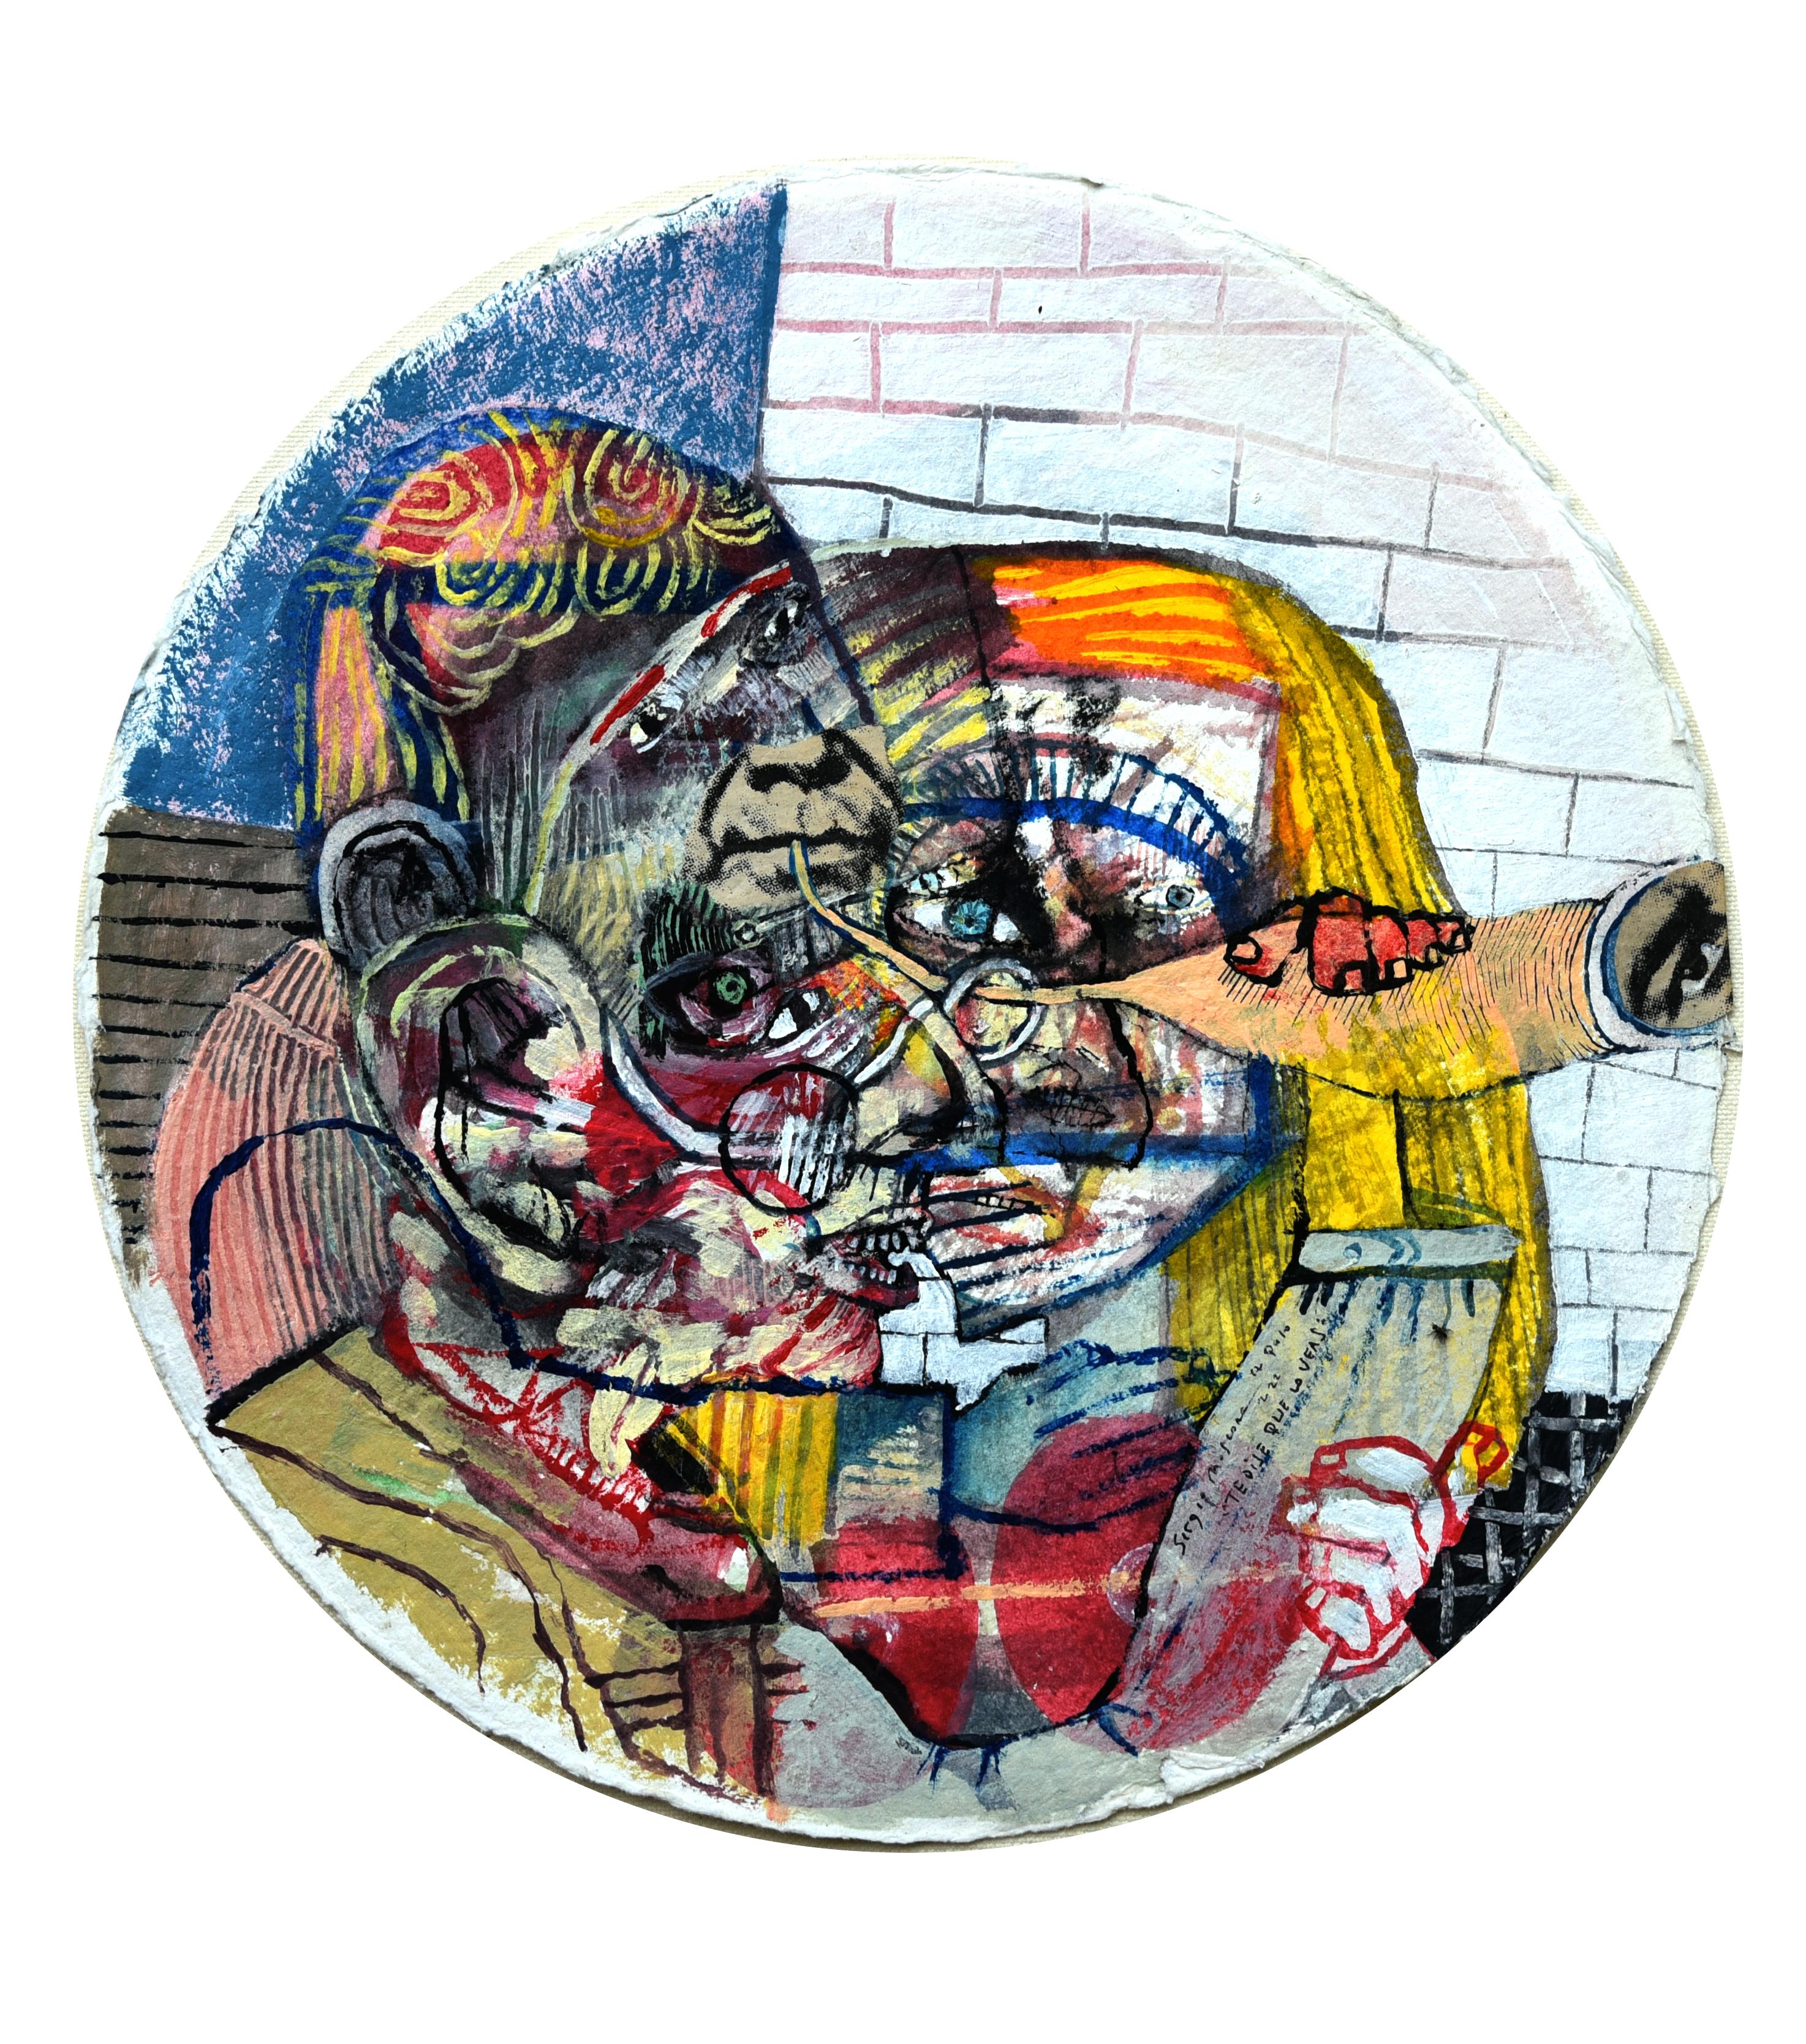 Acrylic paint and ink on paper
Tondo (diameter 30 cm)
Hand-signed and dated lower right